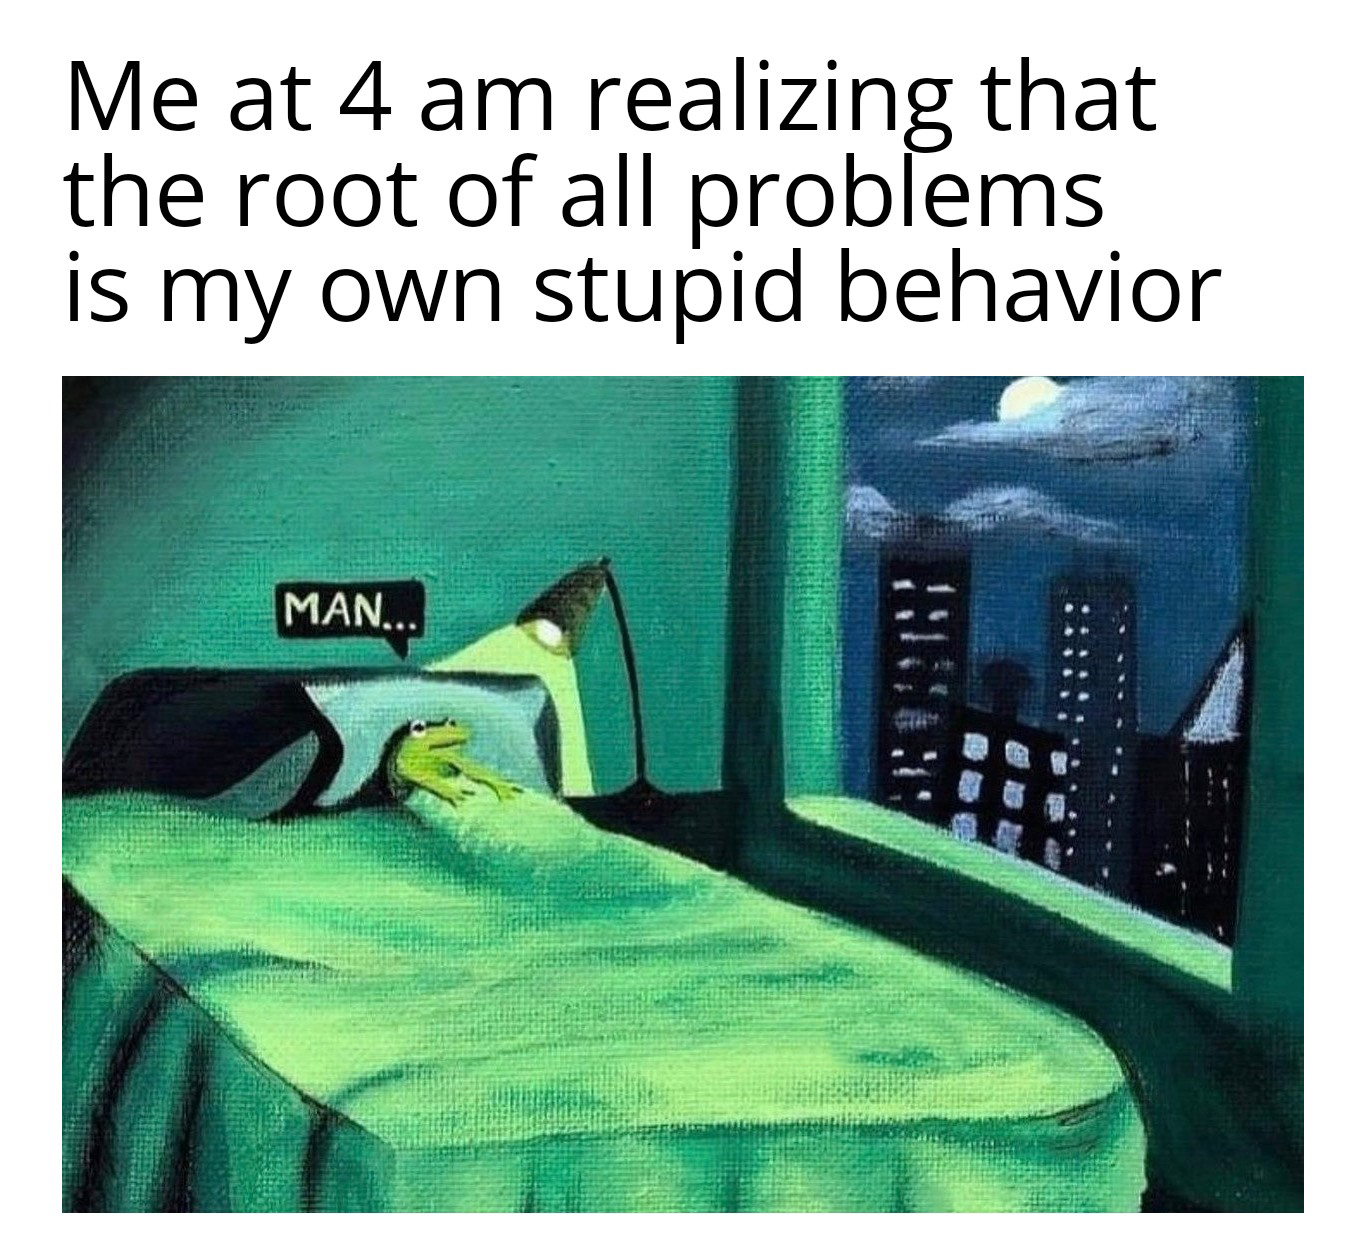 Meme - Me at 4 am realizing that the root of all problems is my own stupid behavior Man...